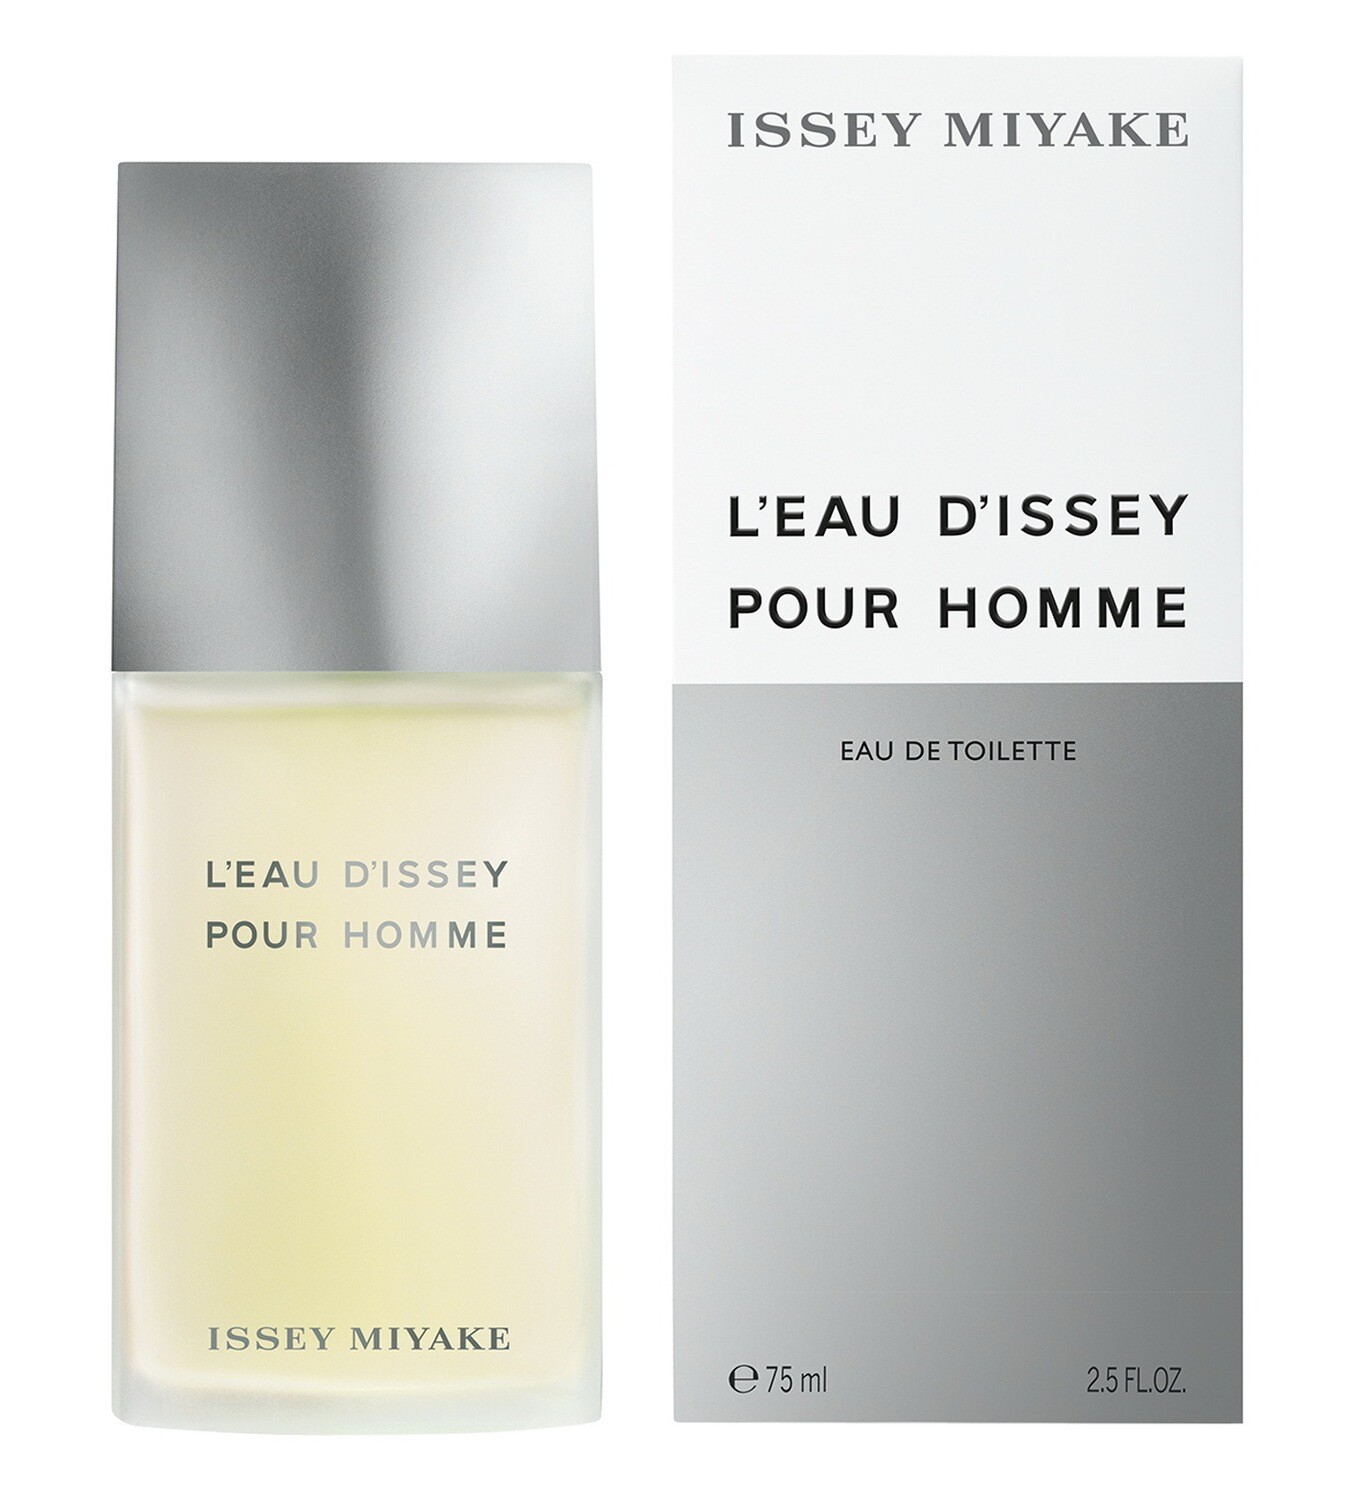 L'Eau d'Issey pour Homme - Issey Miyake